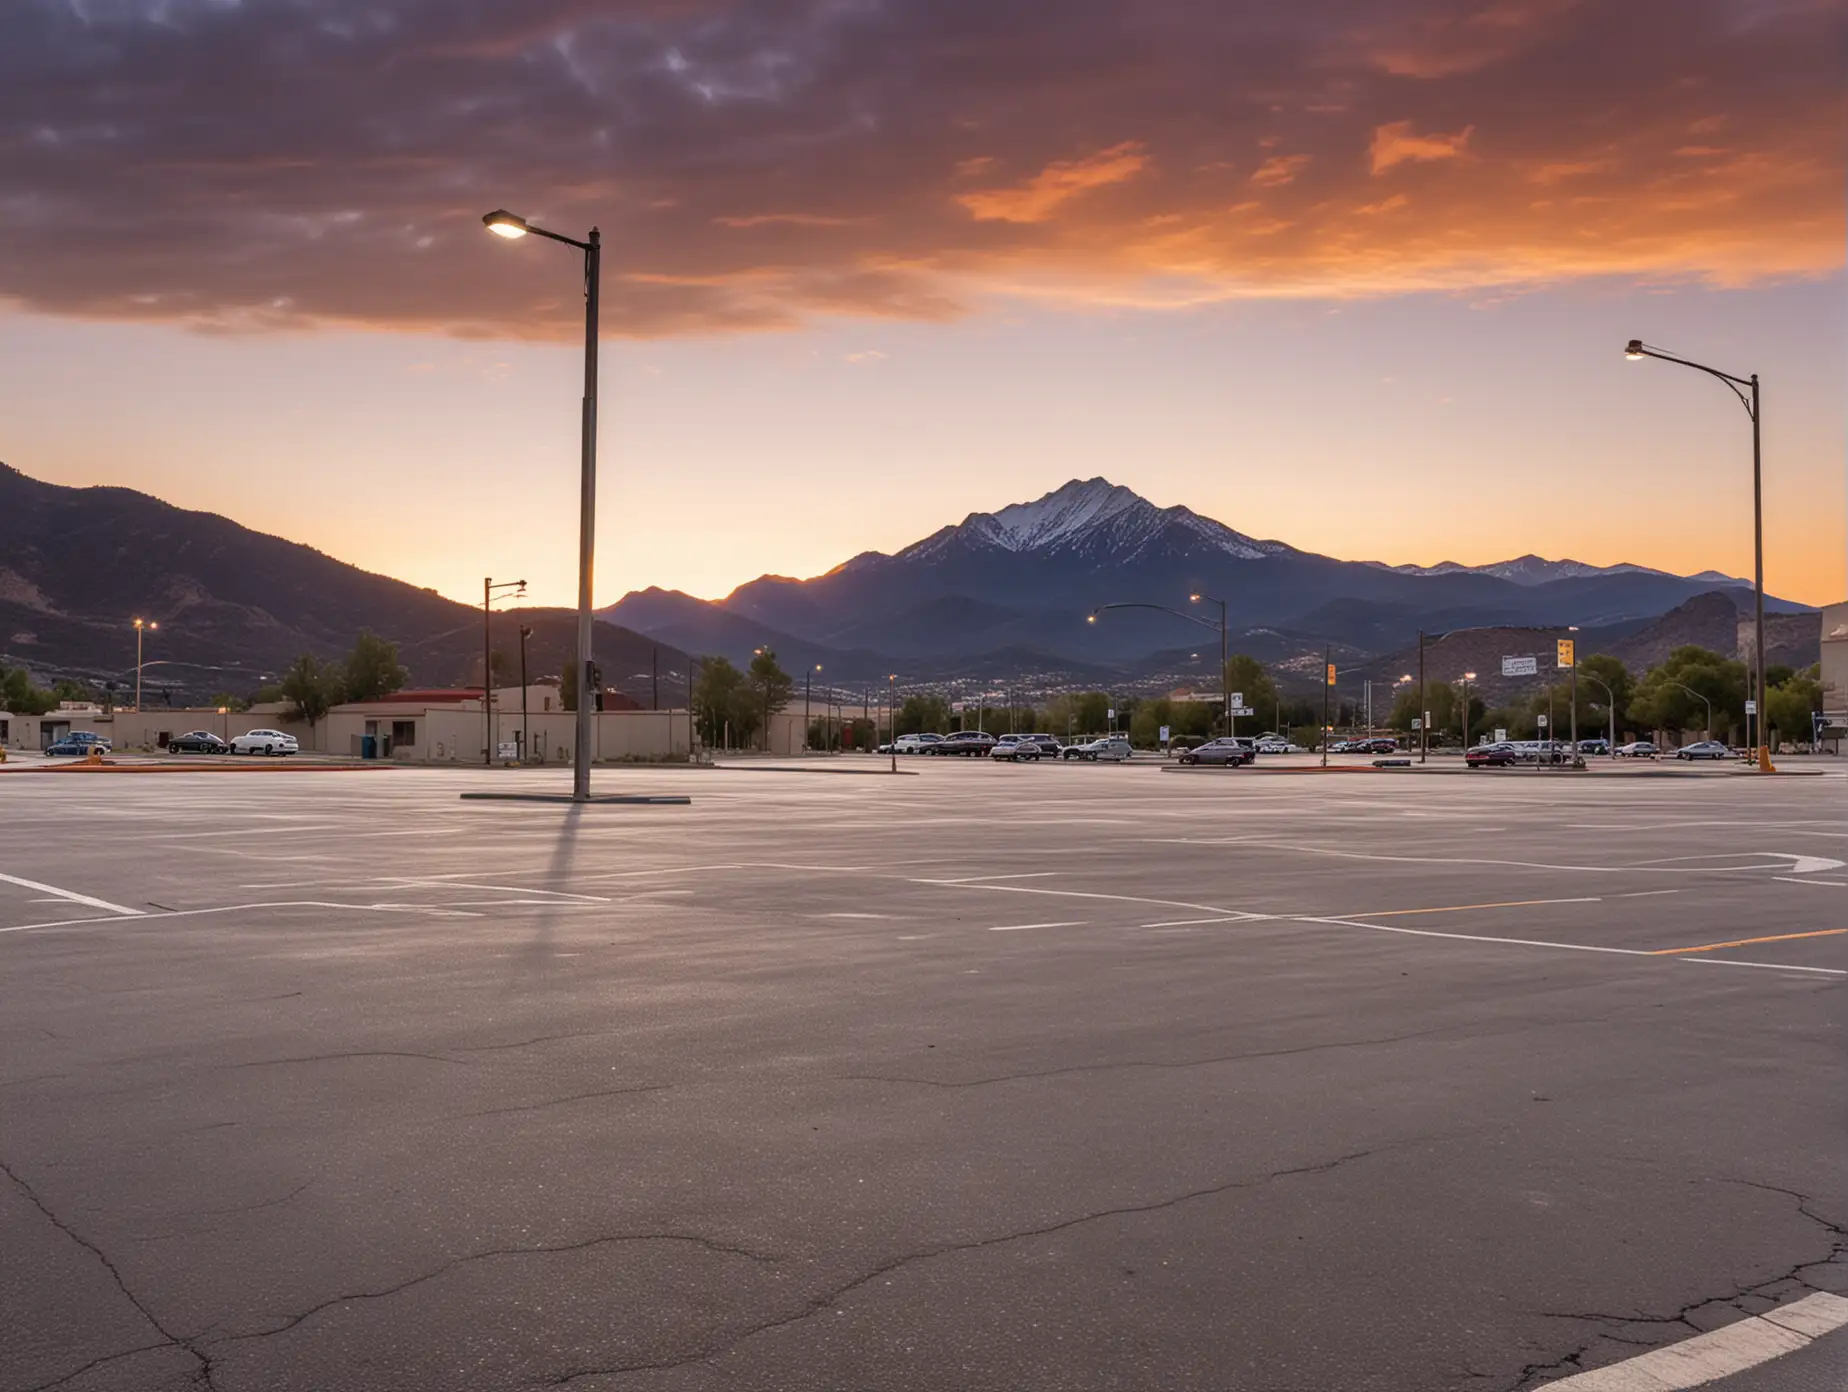 vacant parking lot,mountain background,street lights,sunset,no marks on pavement